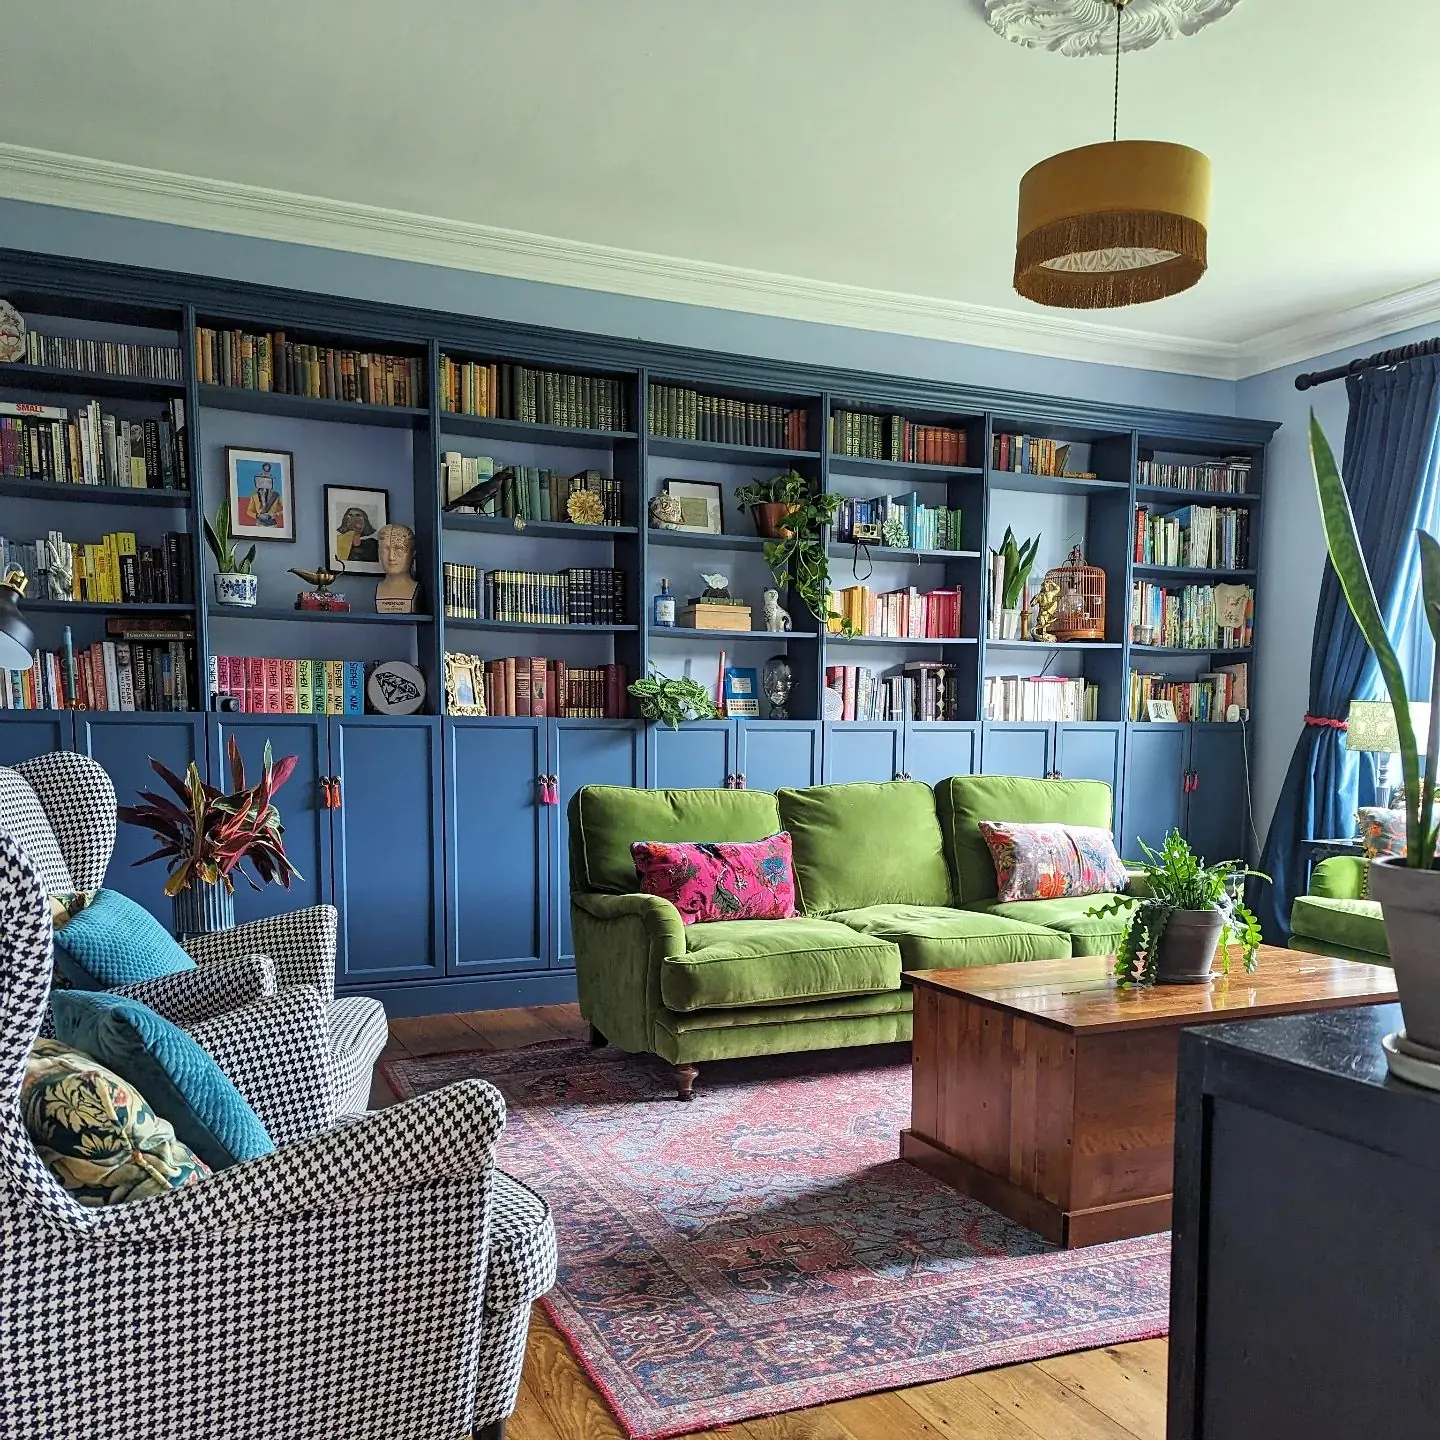 choosing the right color scheme for an eclectic living room can be daunting as well as fun as in this living room with a green couch and blue wall cabinet.